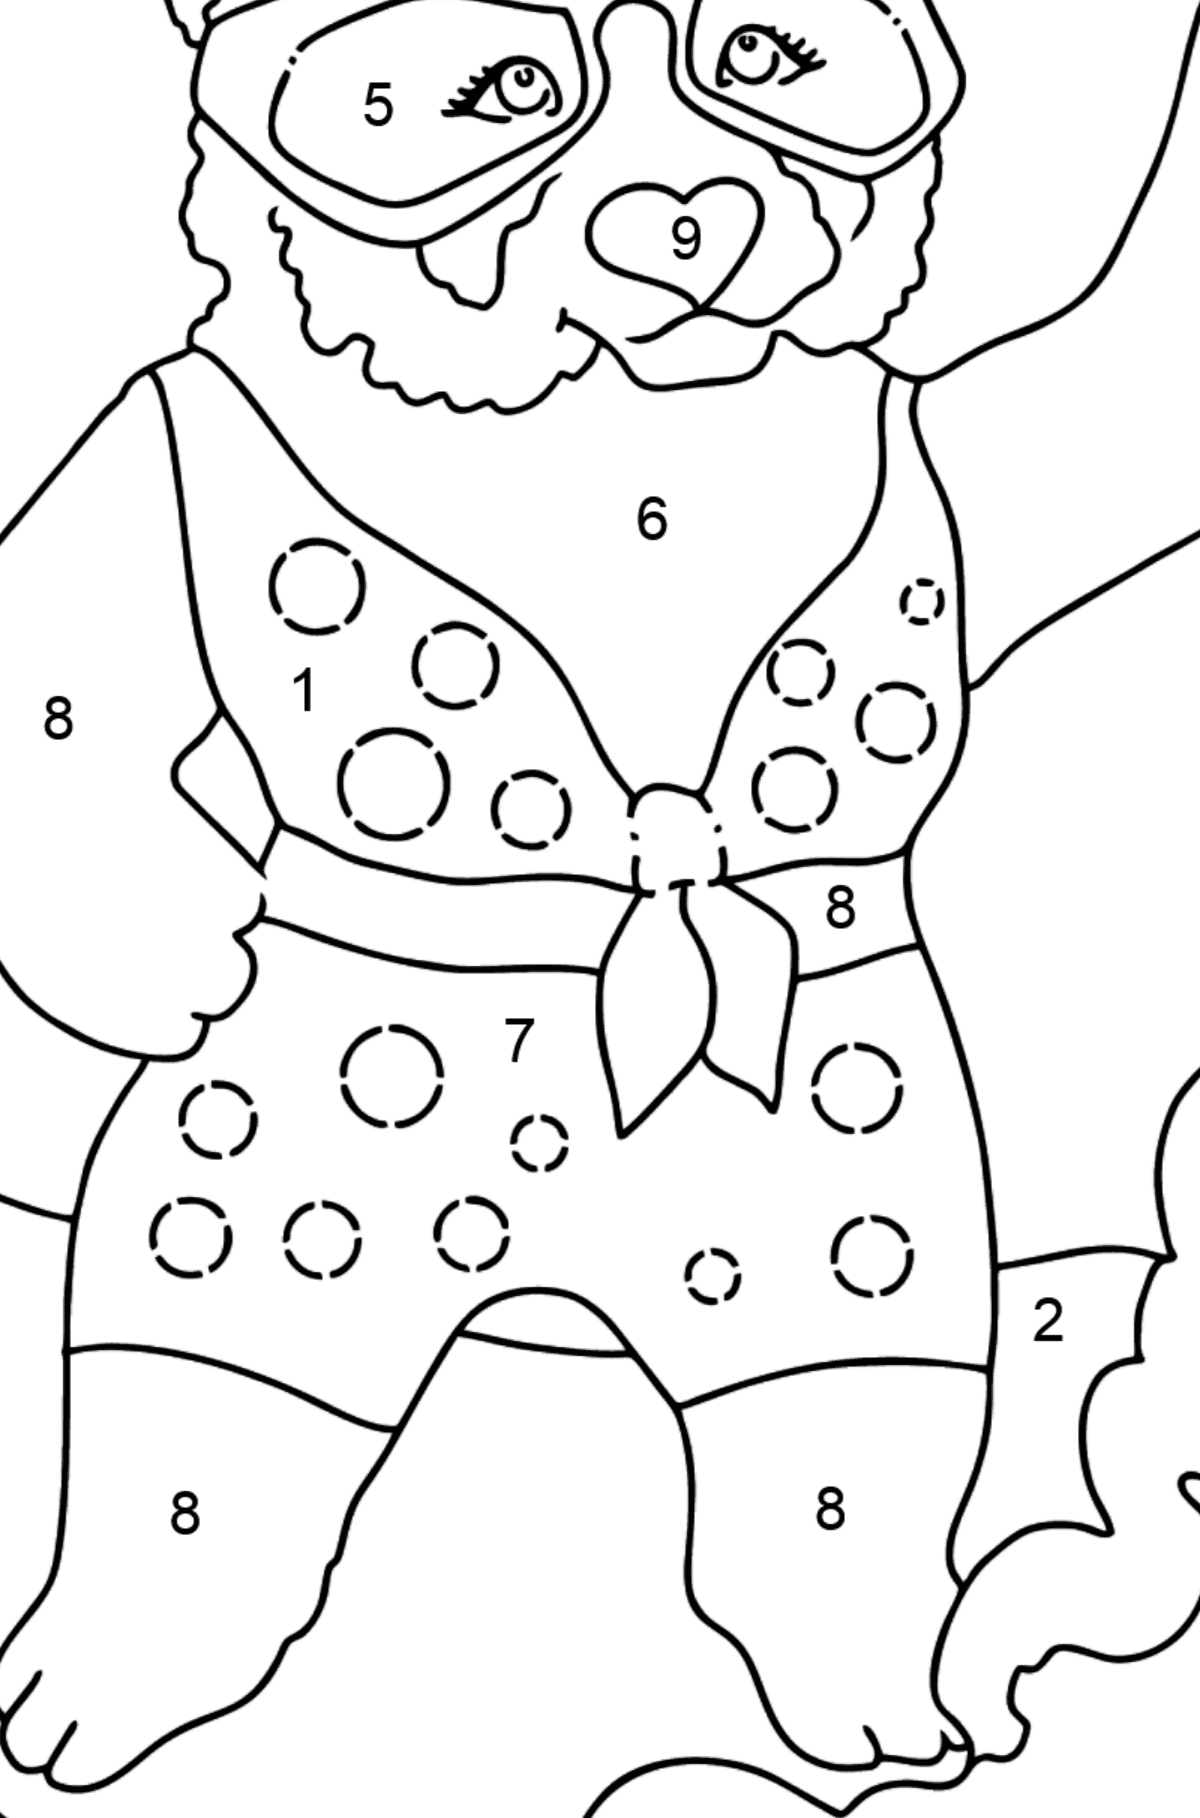 Coloring Page - A Panda with a Surfboard - Coloring by Numbers for Kids